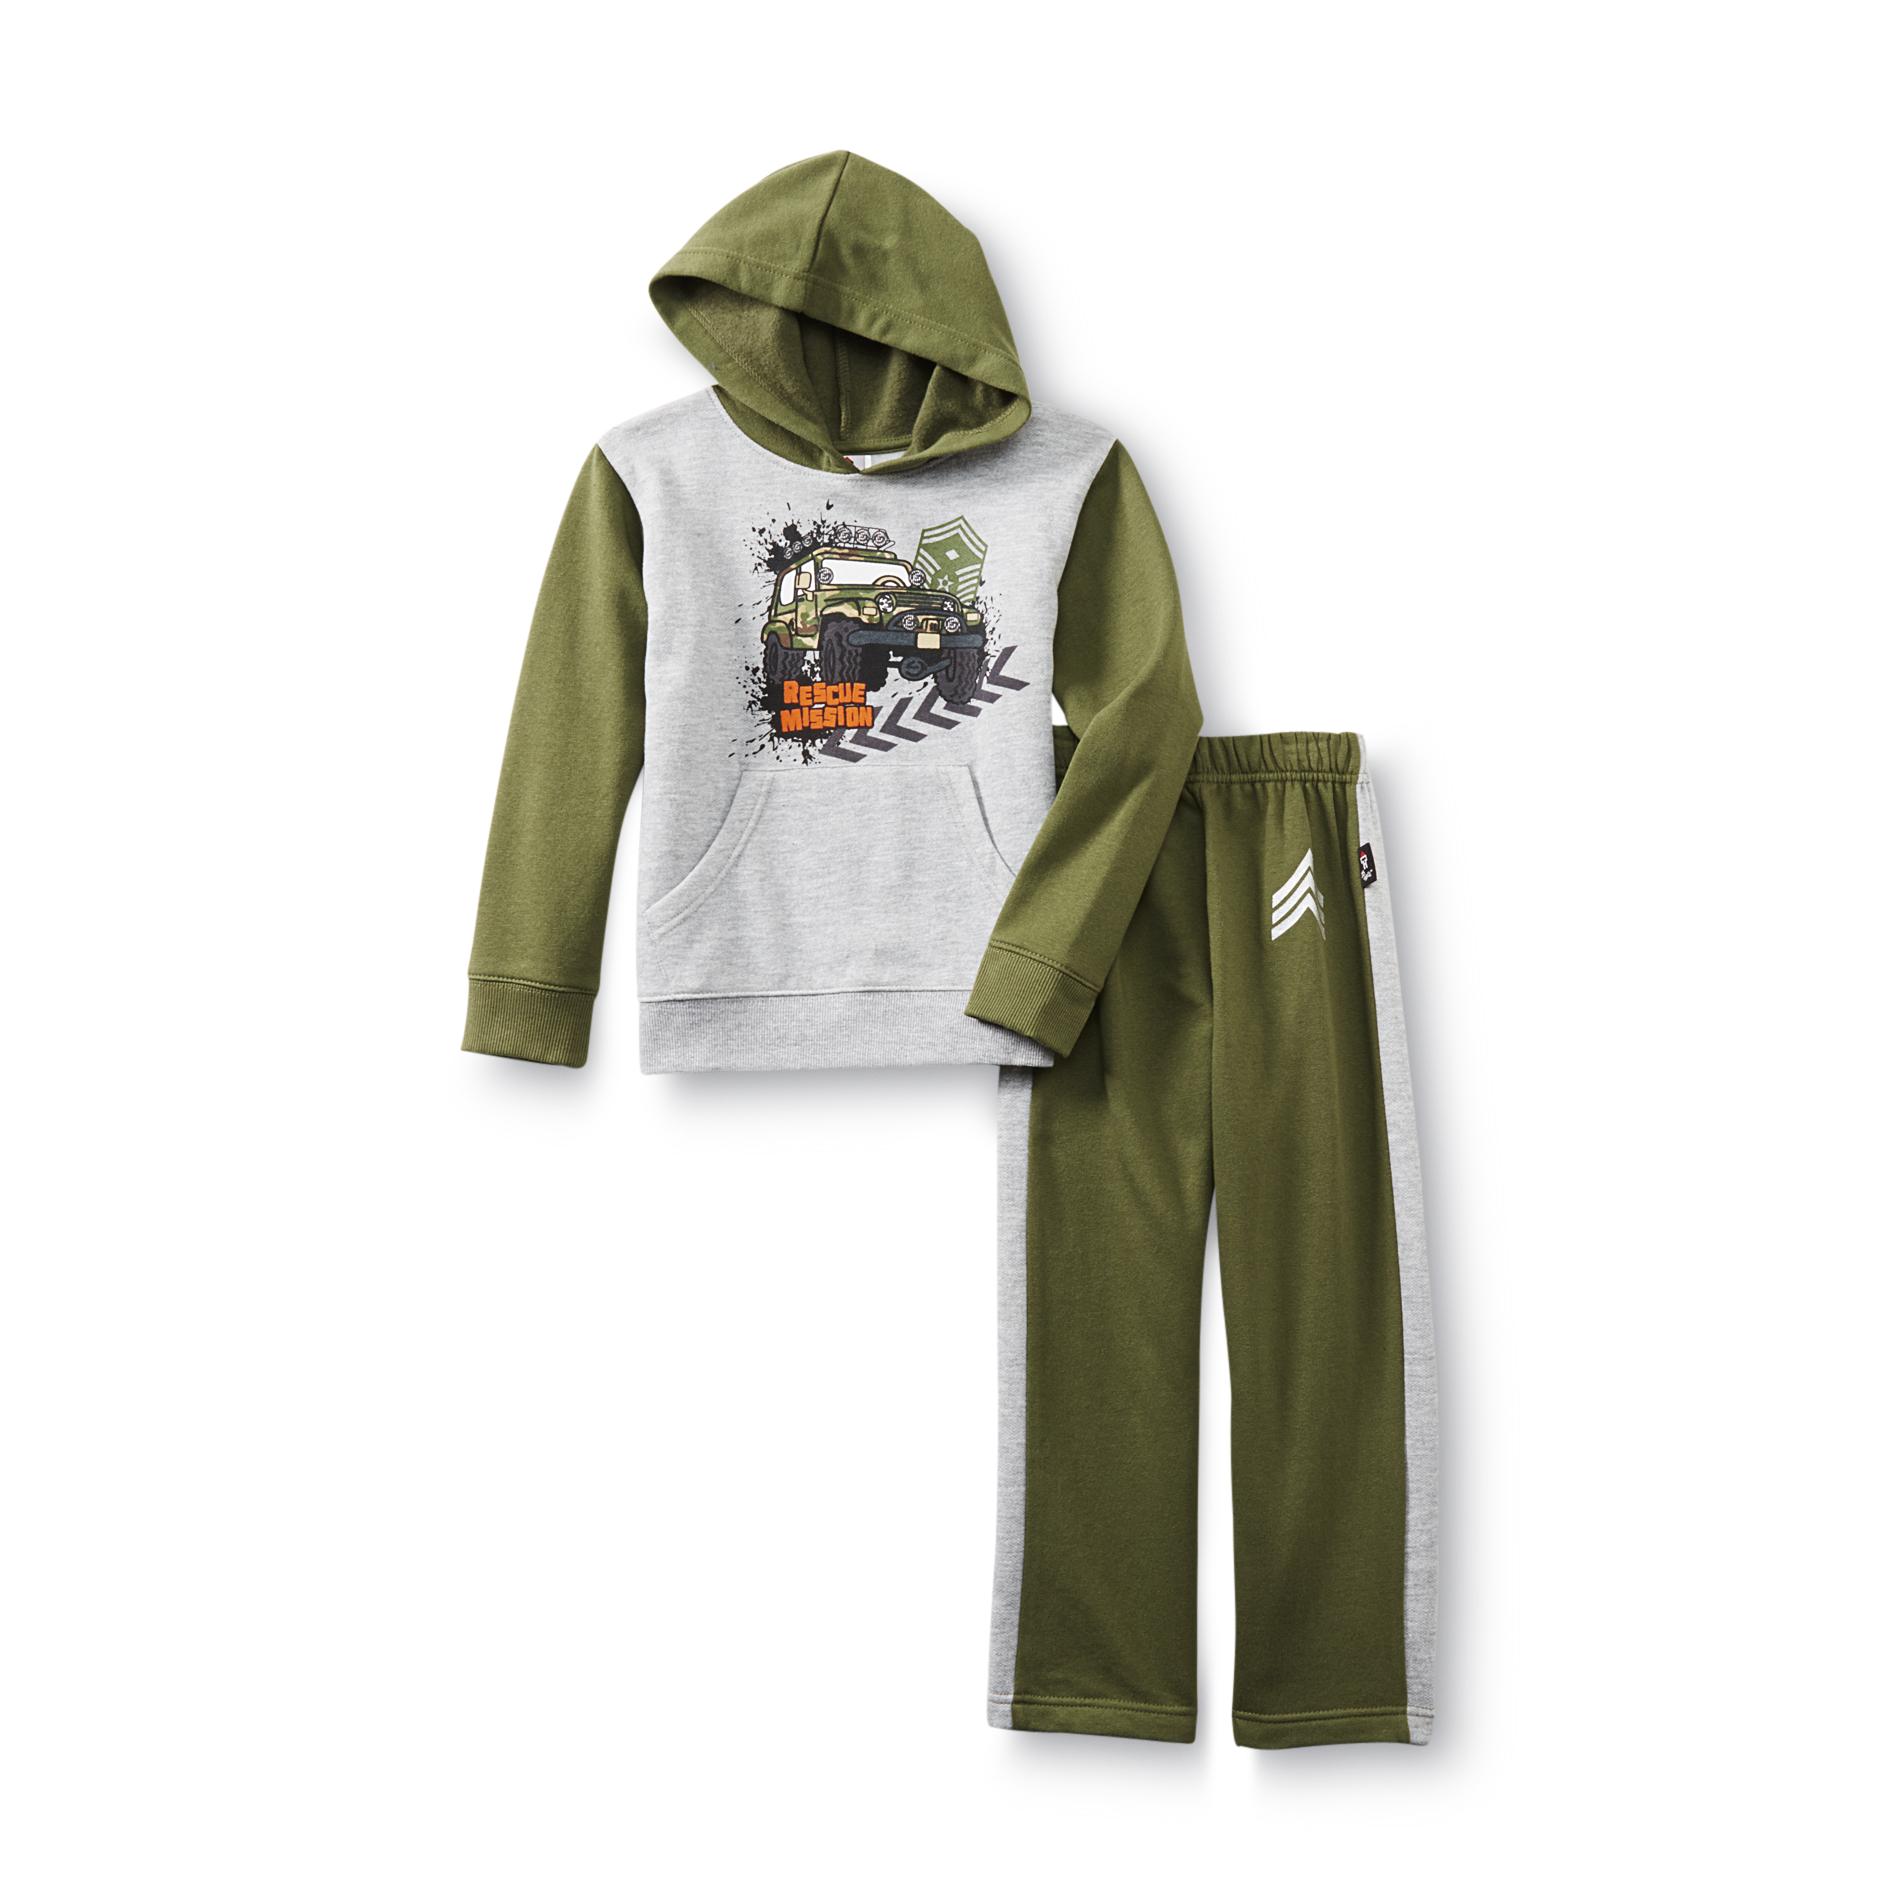 Clubhouse Collection Boy's Graphic Hoodie & Sweatpants - Army Truck